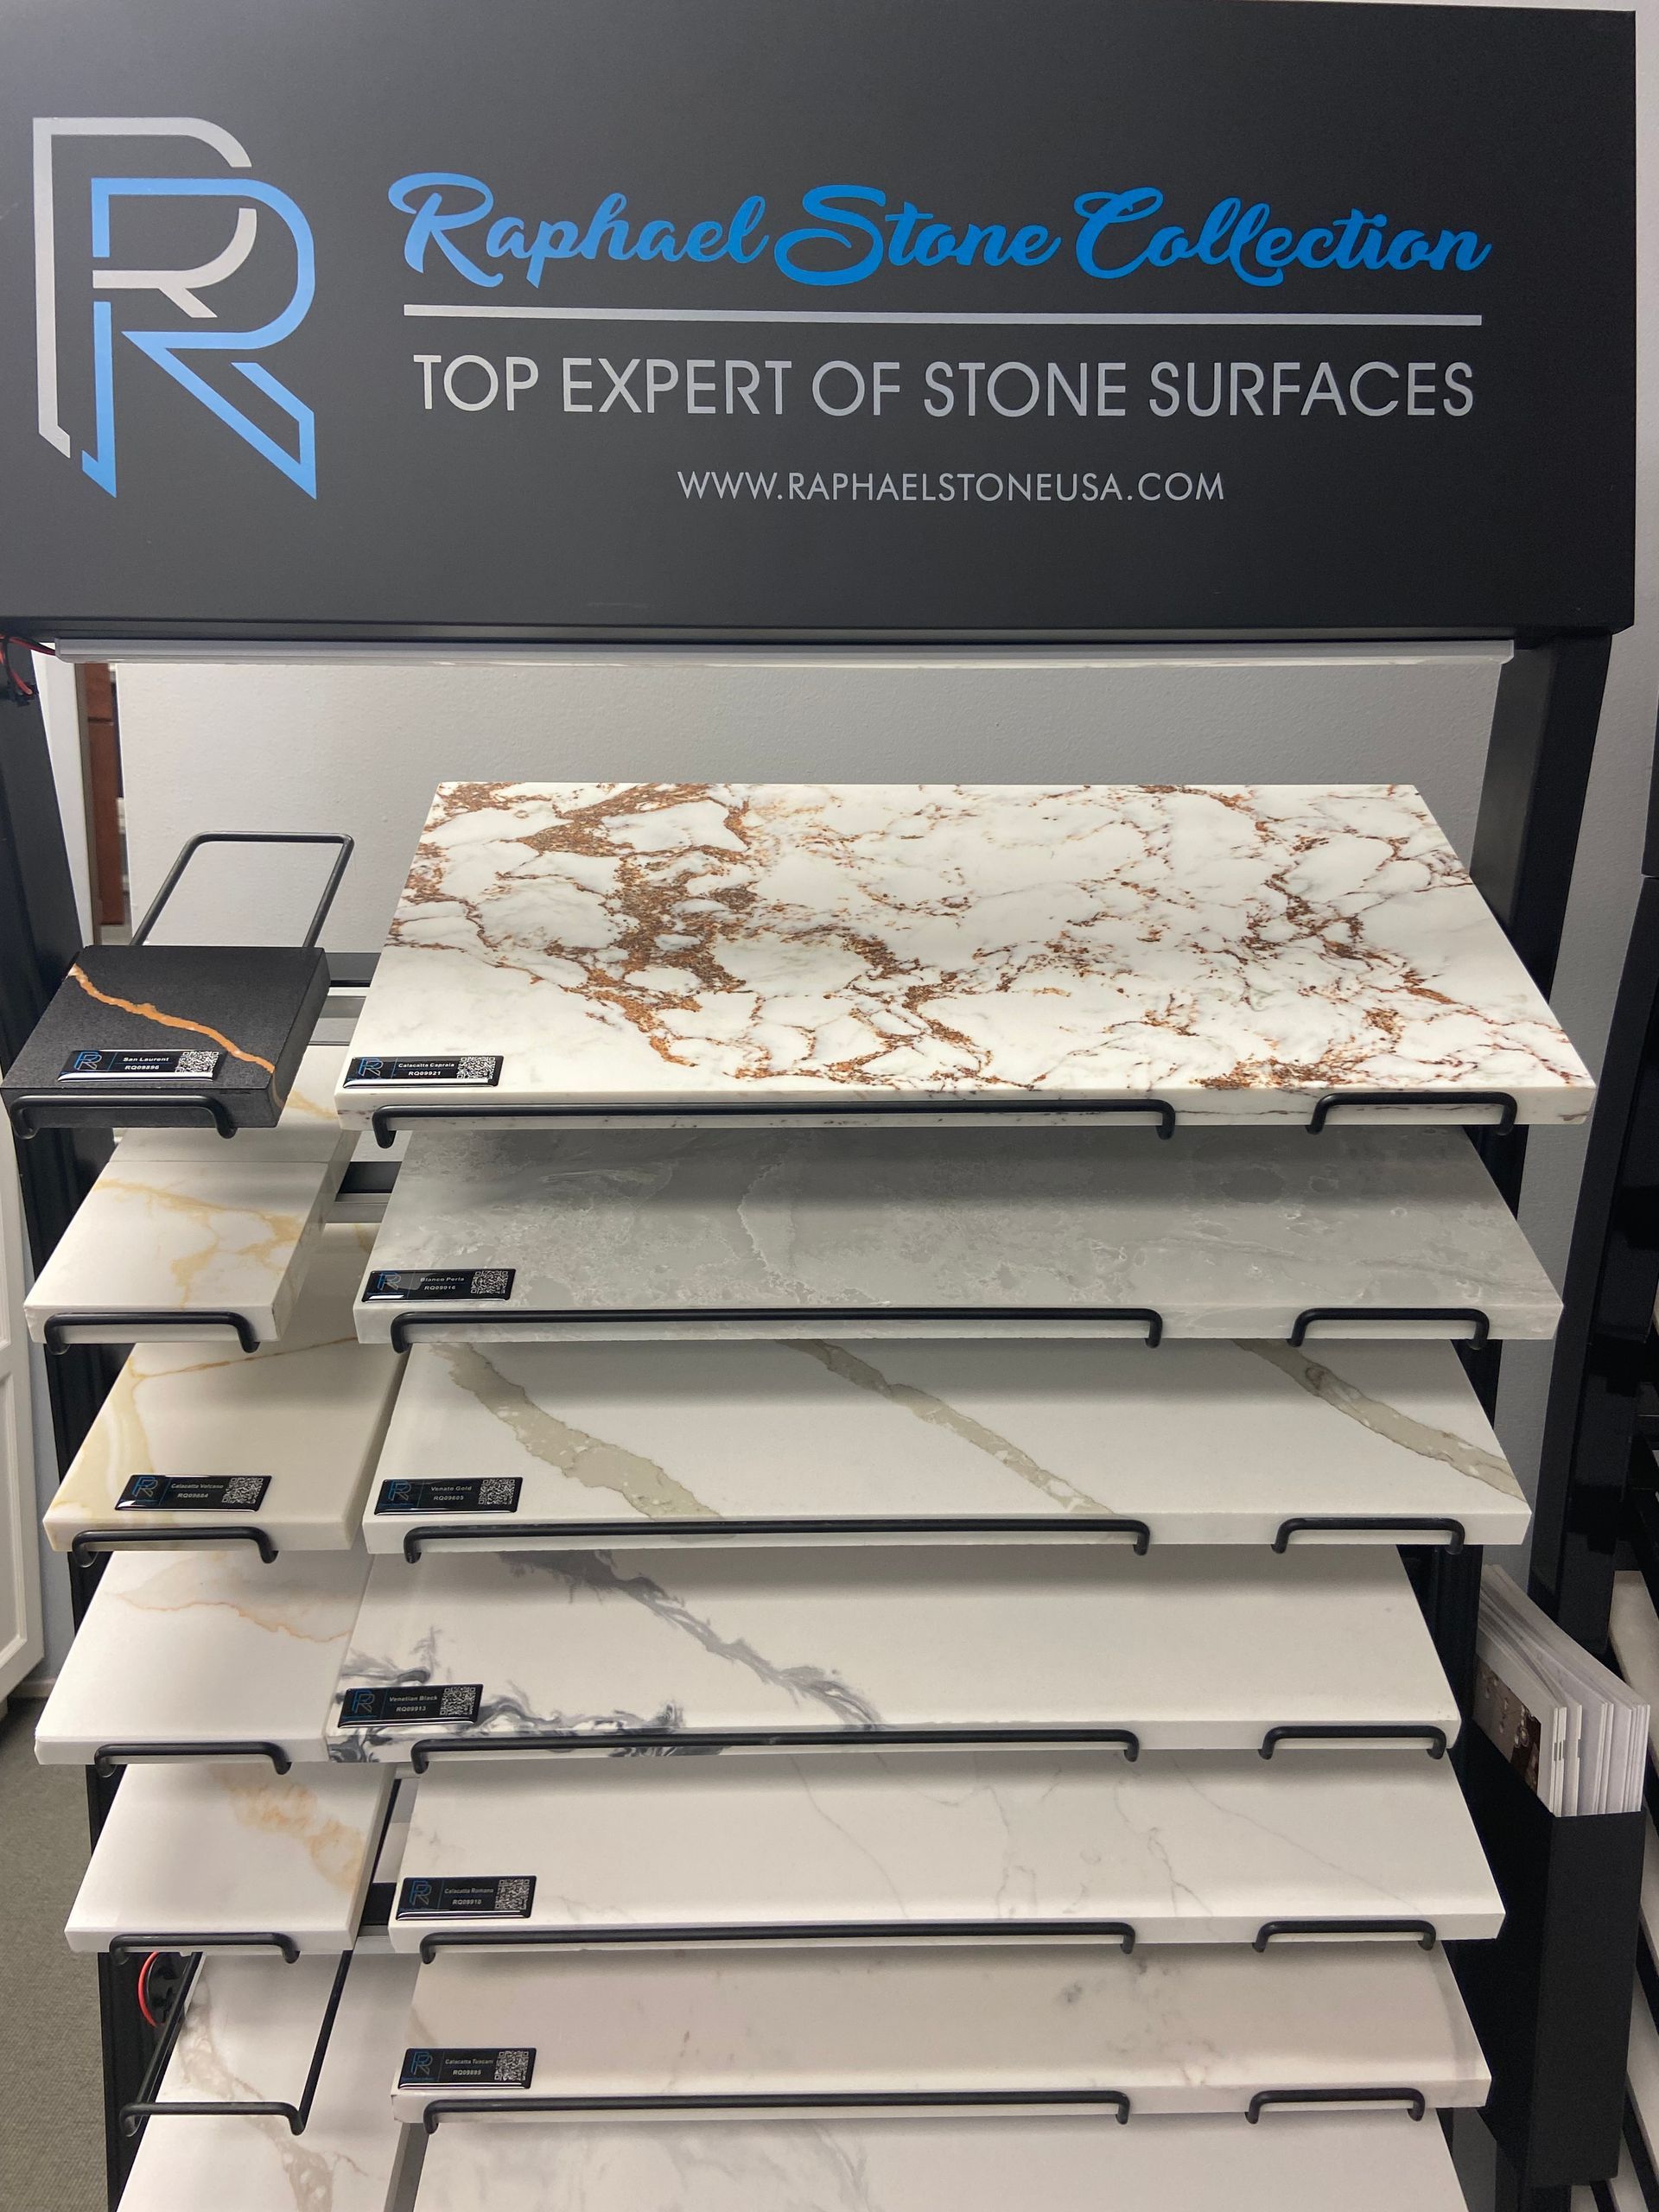 A display of different types of stone surfaces in a store.